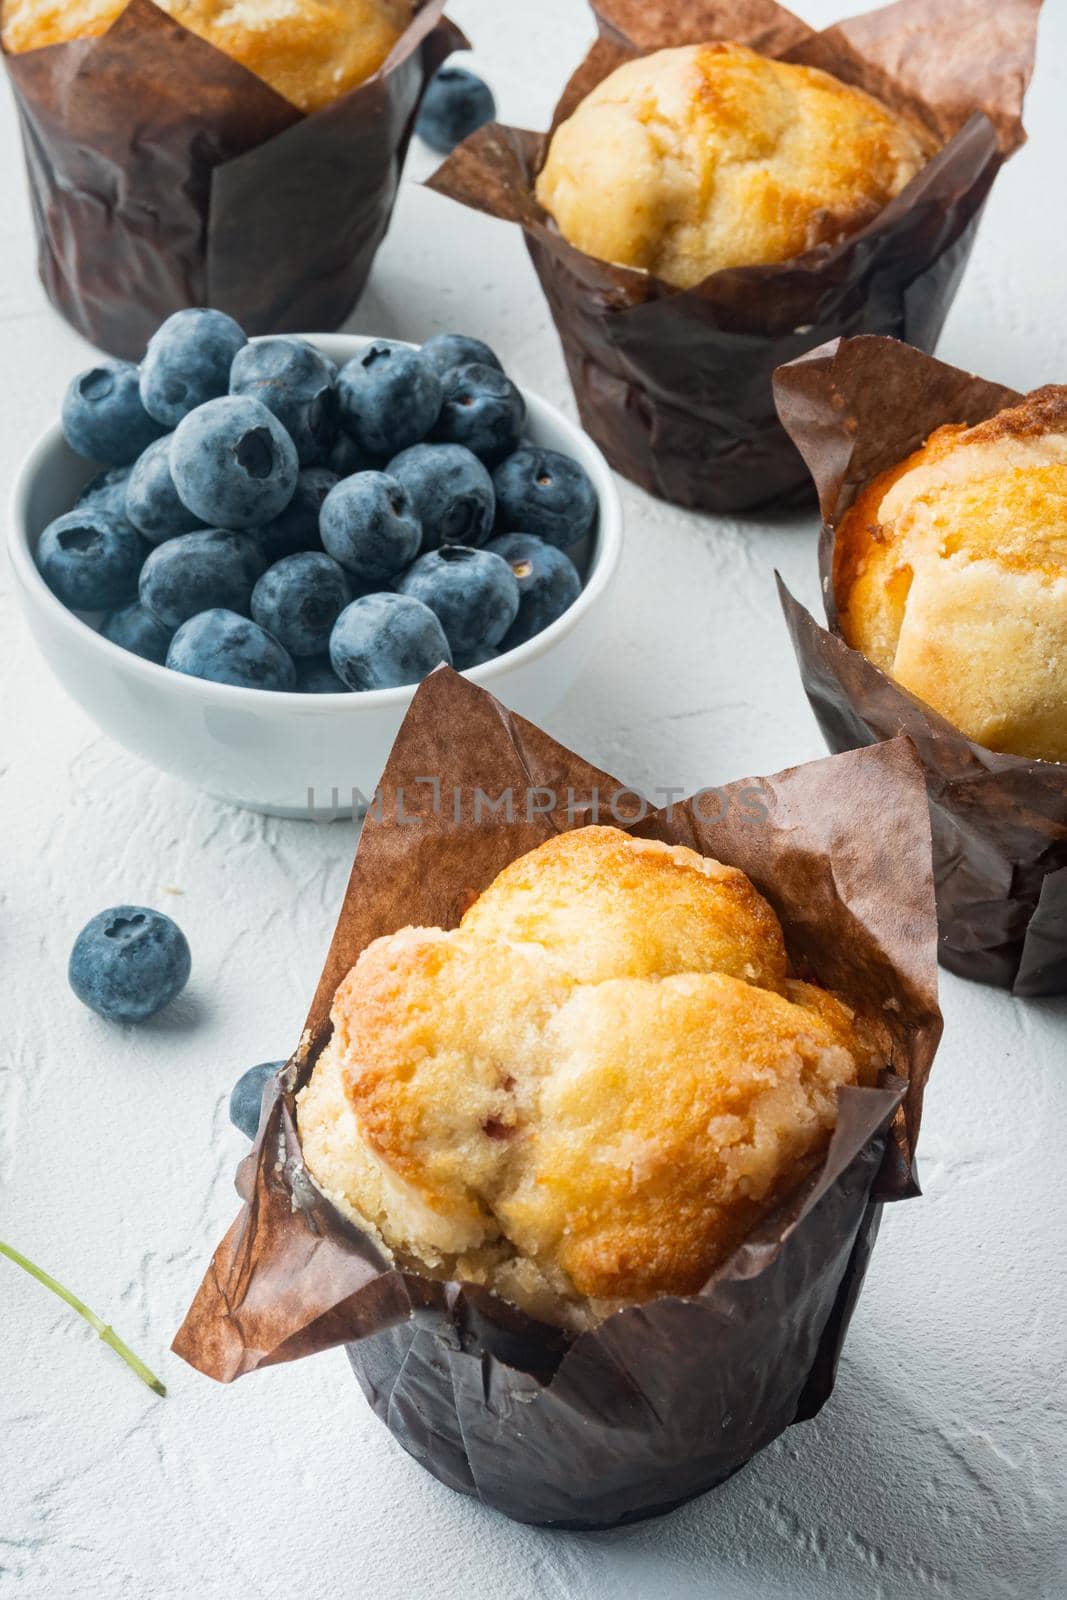 Muffin with blueberries, on white background by Ilianesolenyi